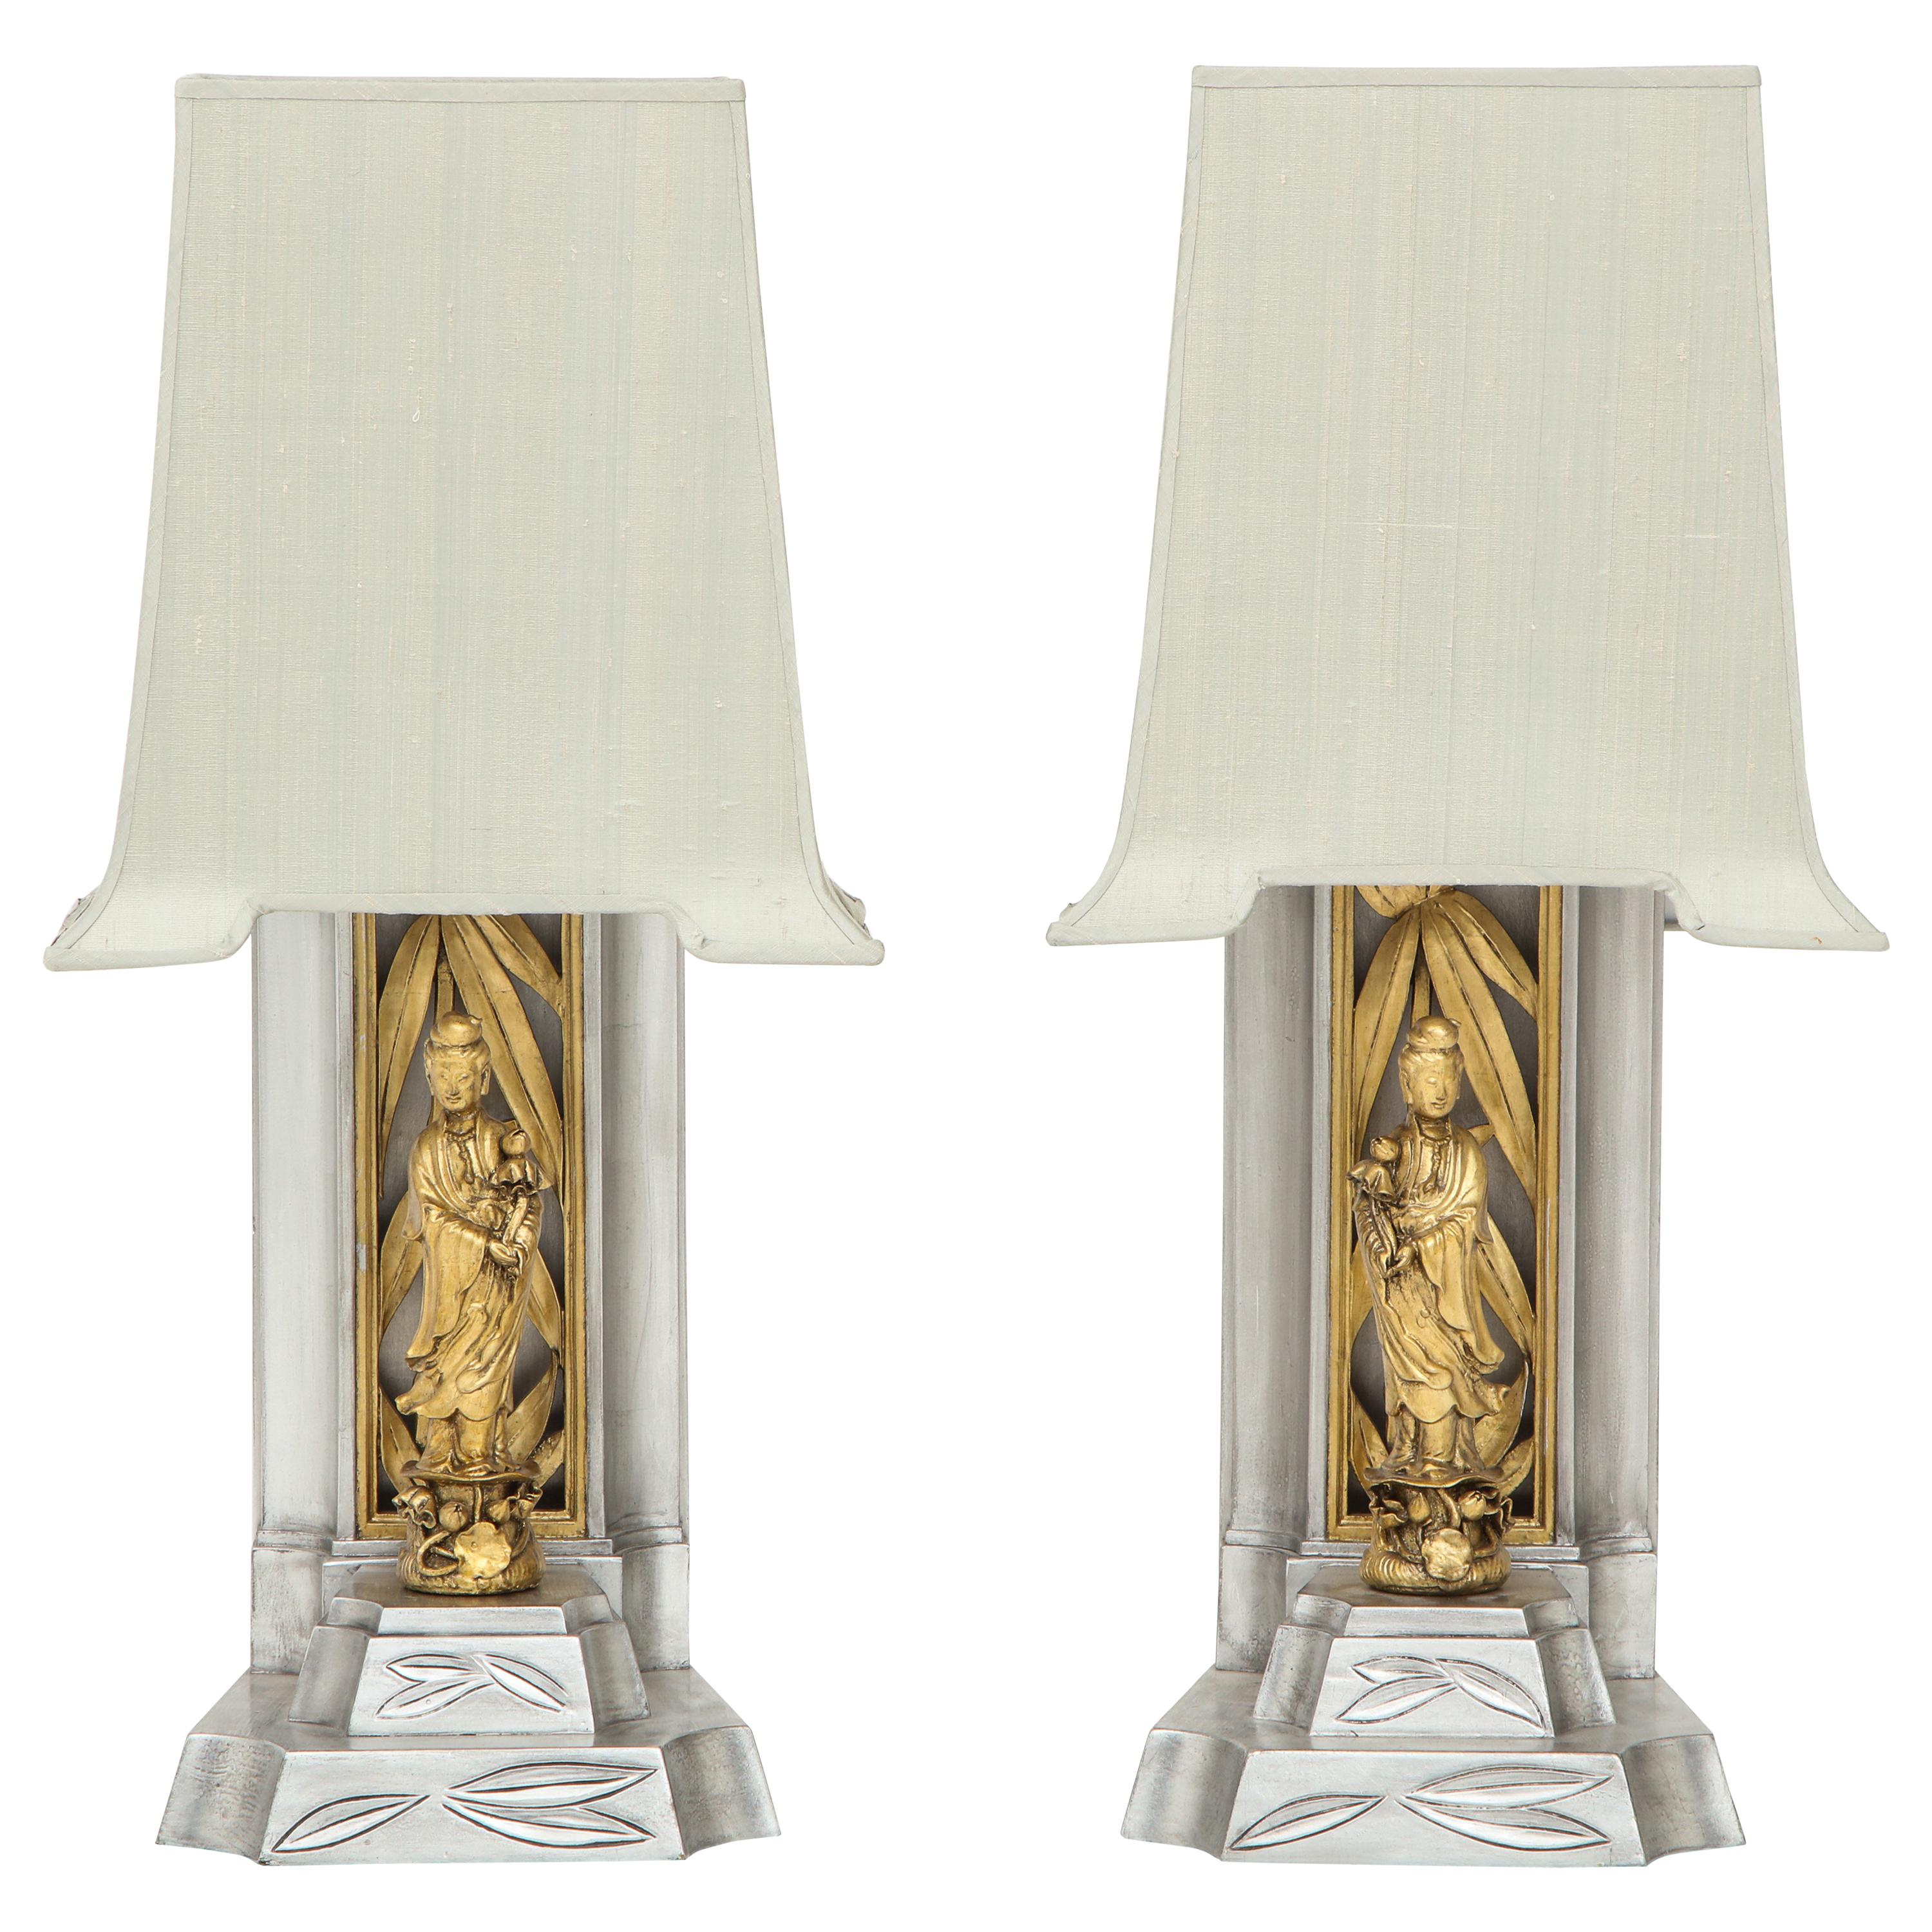 James Mont Gilded Chinoiserie Lamps